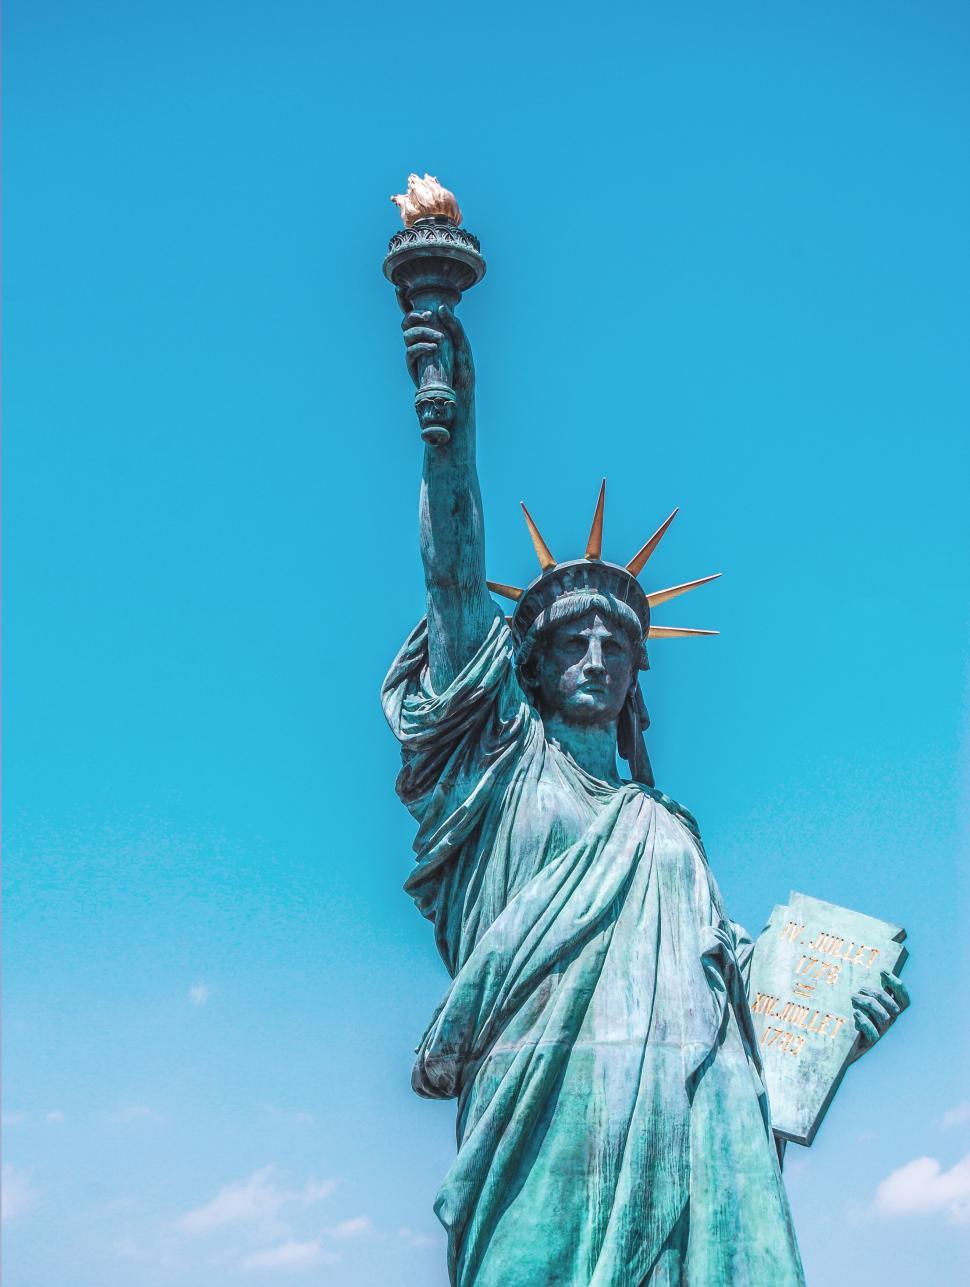 Free Image of Statue of Liberty against blue sky 